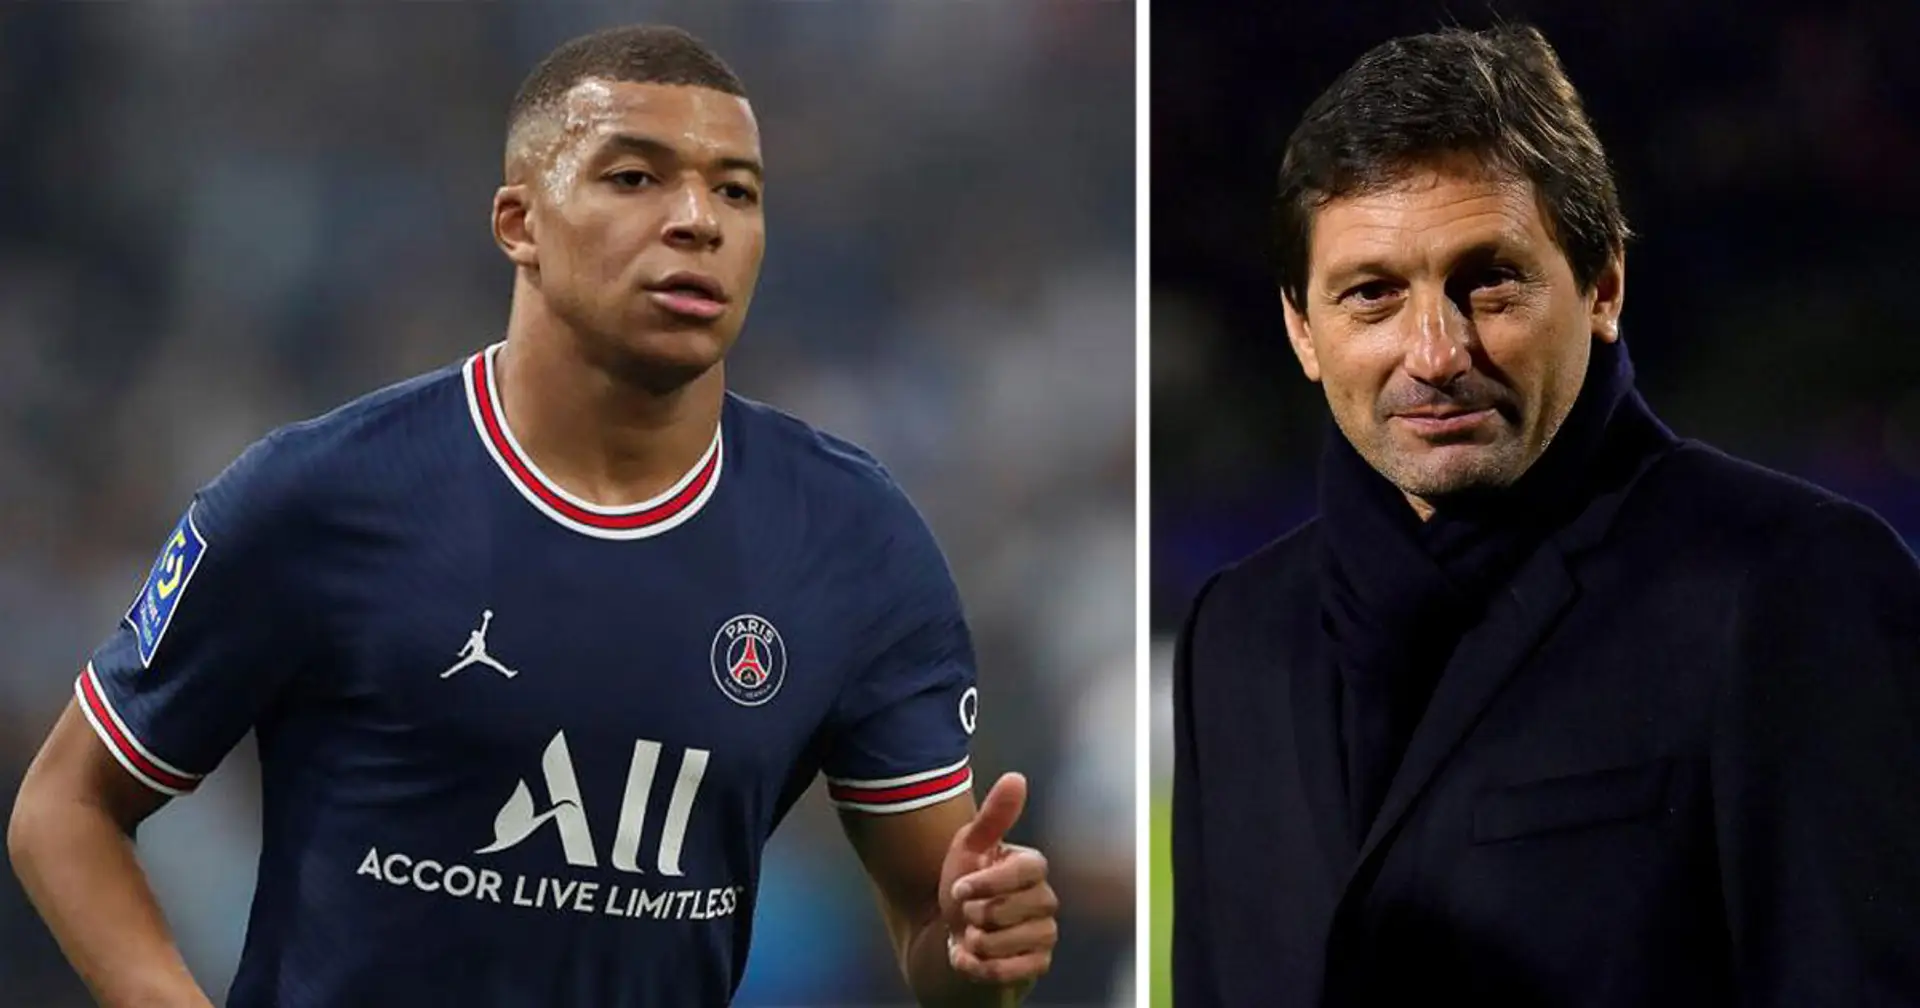 'I think there are still good chances to extend Mbappe's contract': PSG's sporting director Leonardo